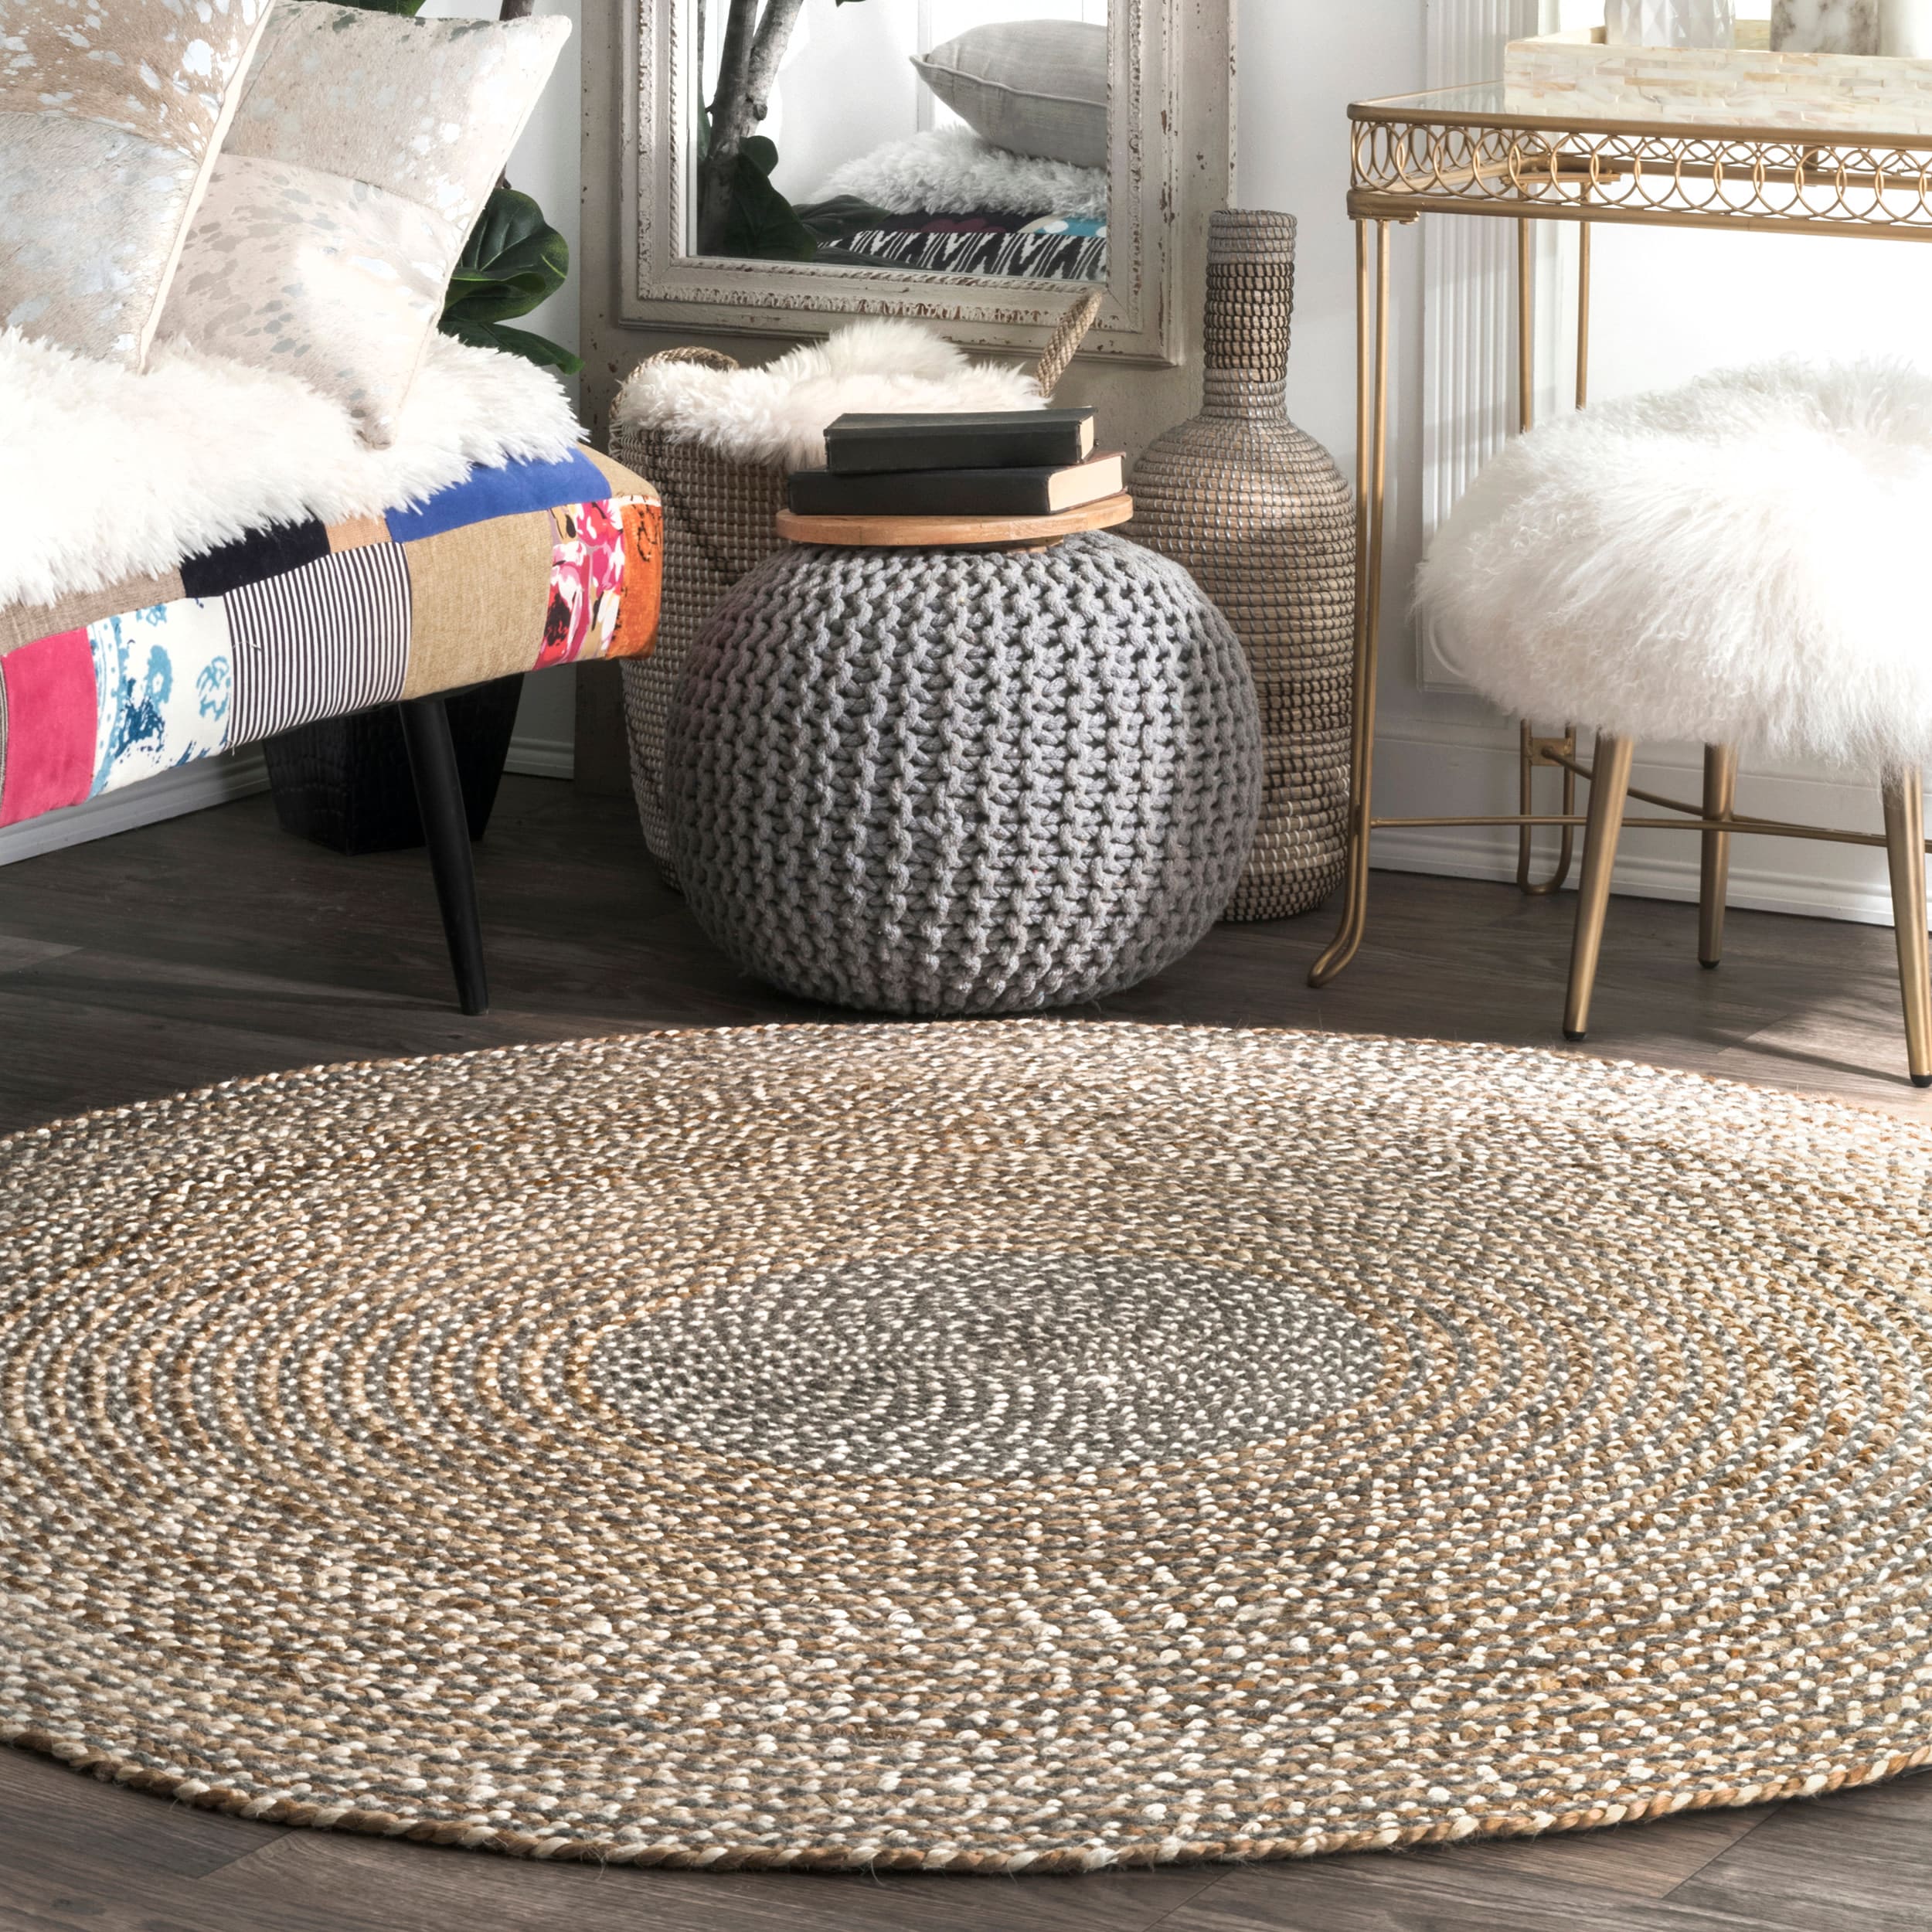 Abstract Hand Braided Oval Beige Jute Rug With Orange Triple Line